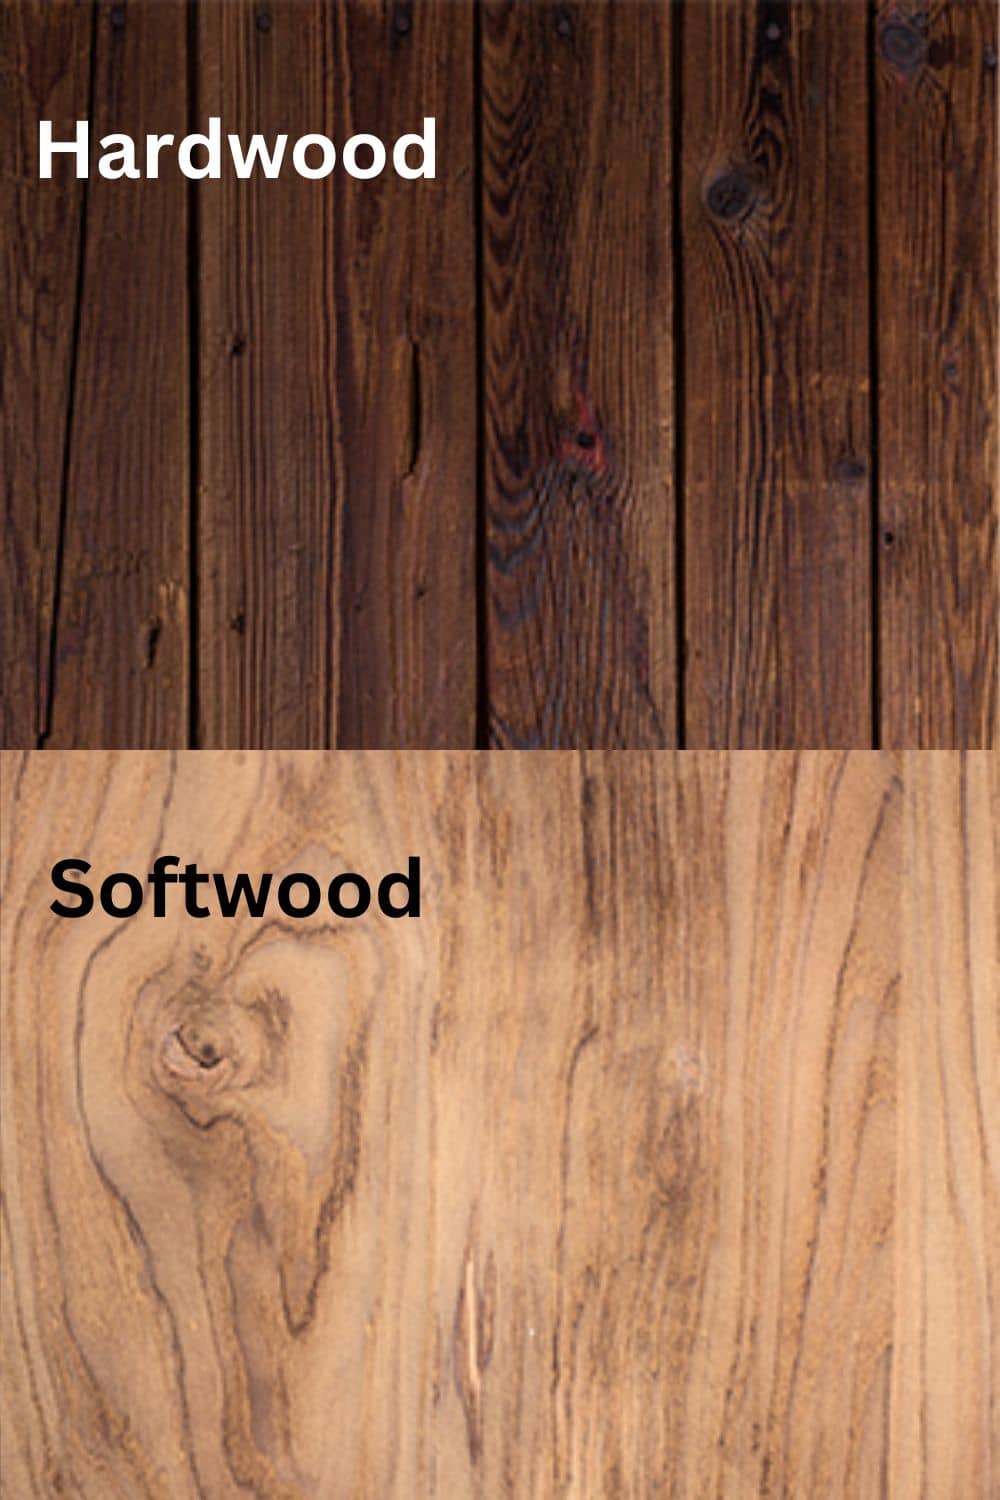 Infographic comparing hardwood look versus softwood look and the hardwood is a darker color